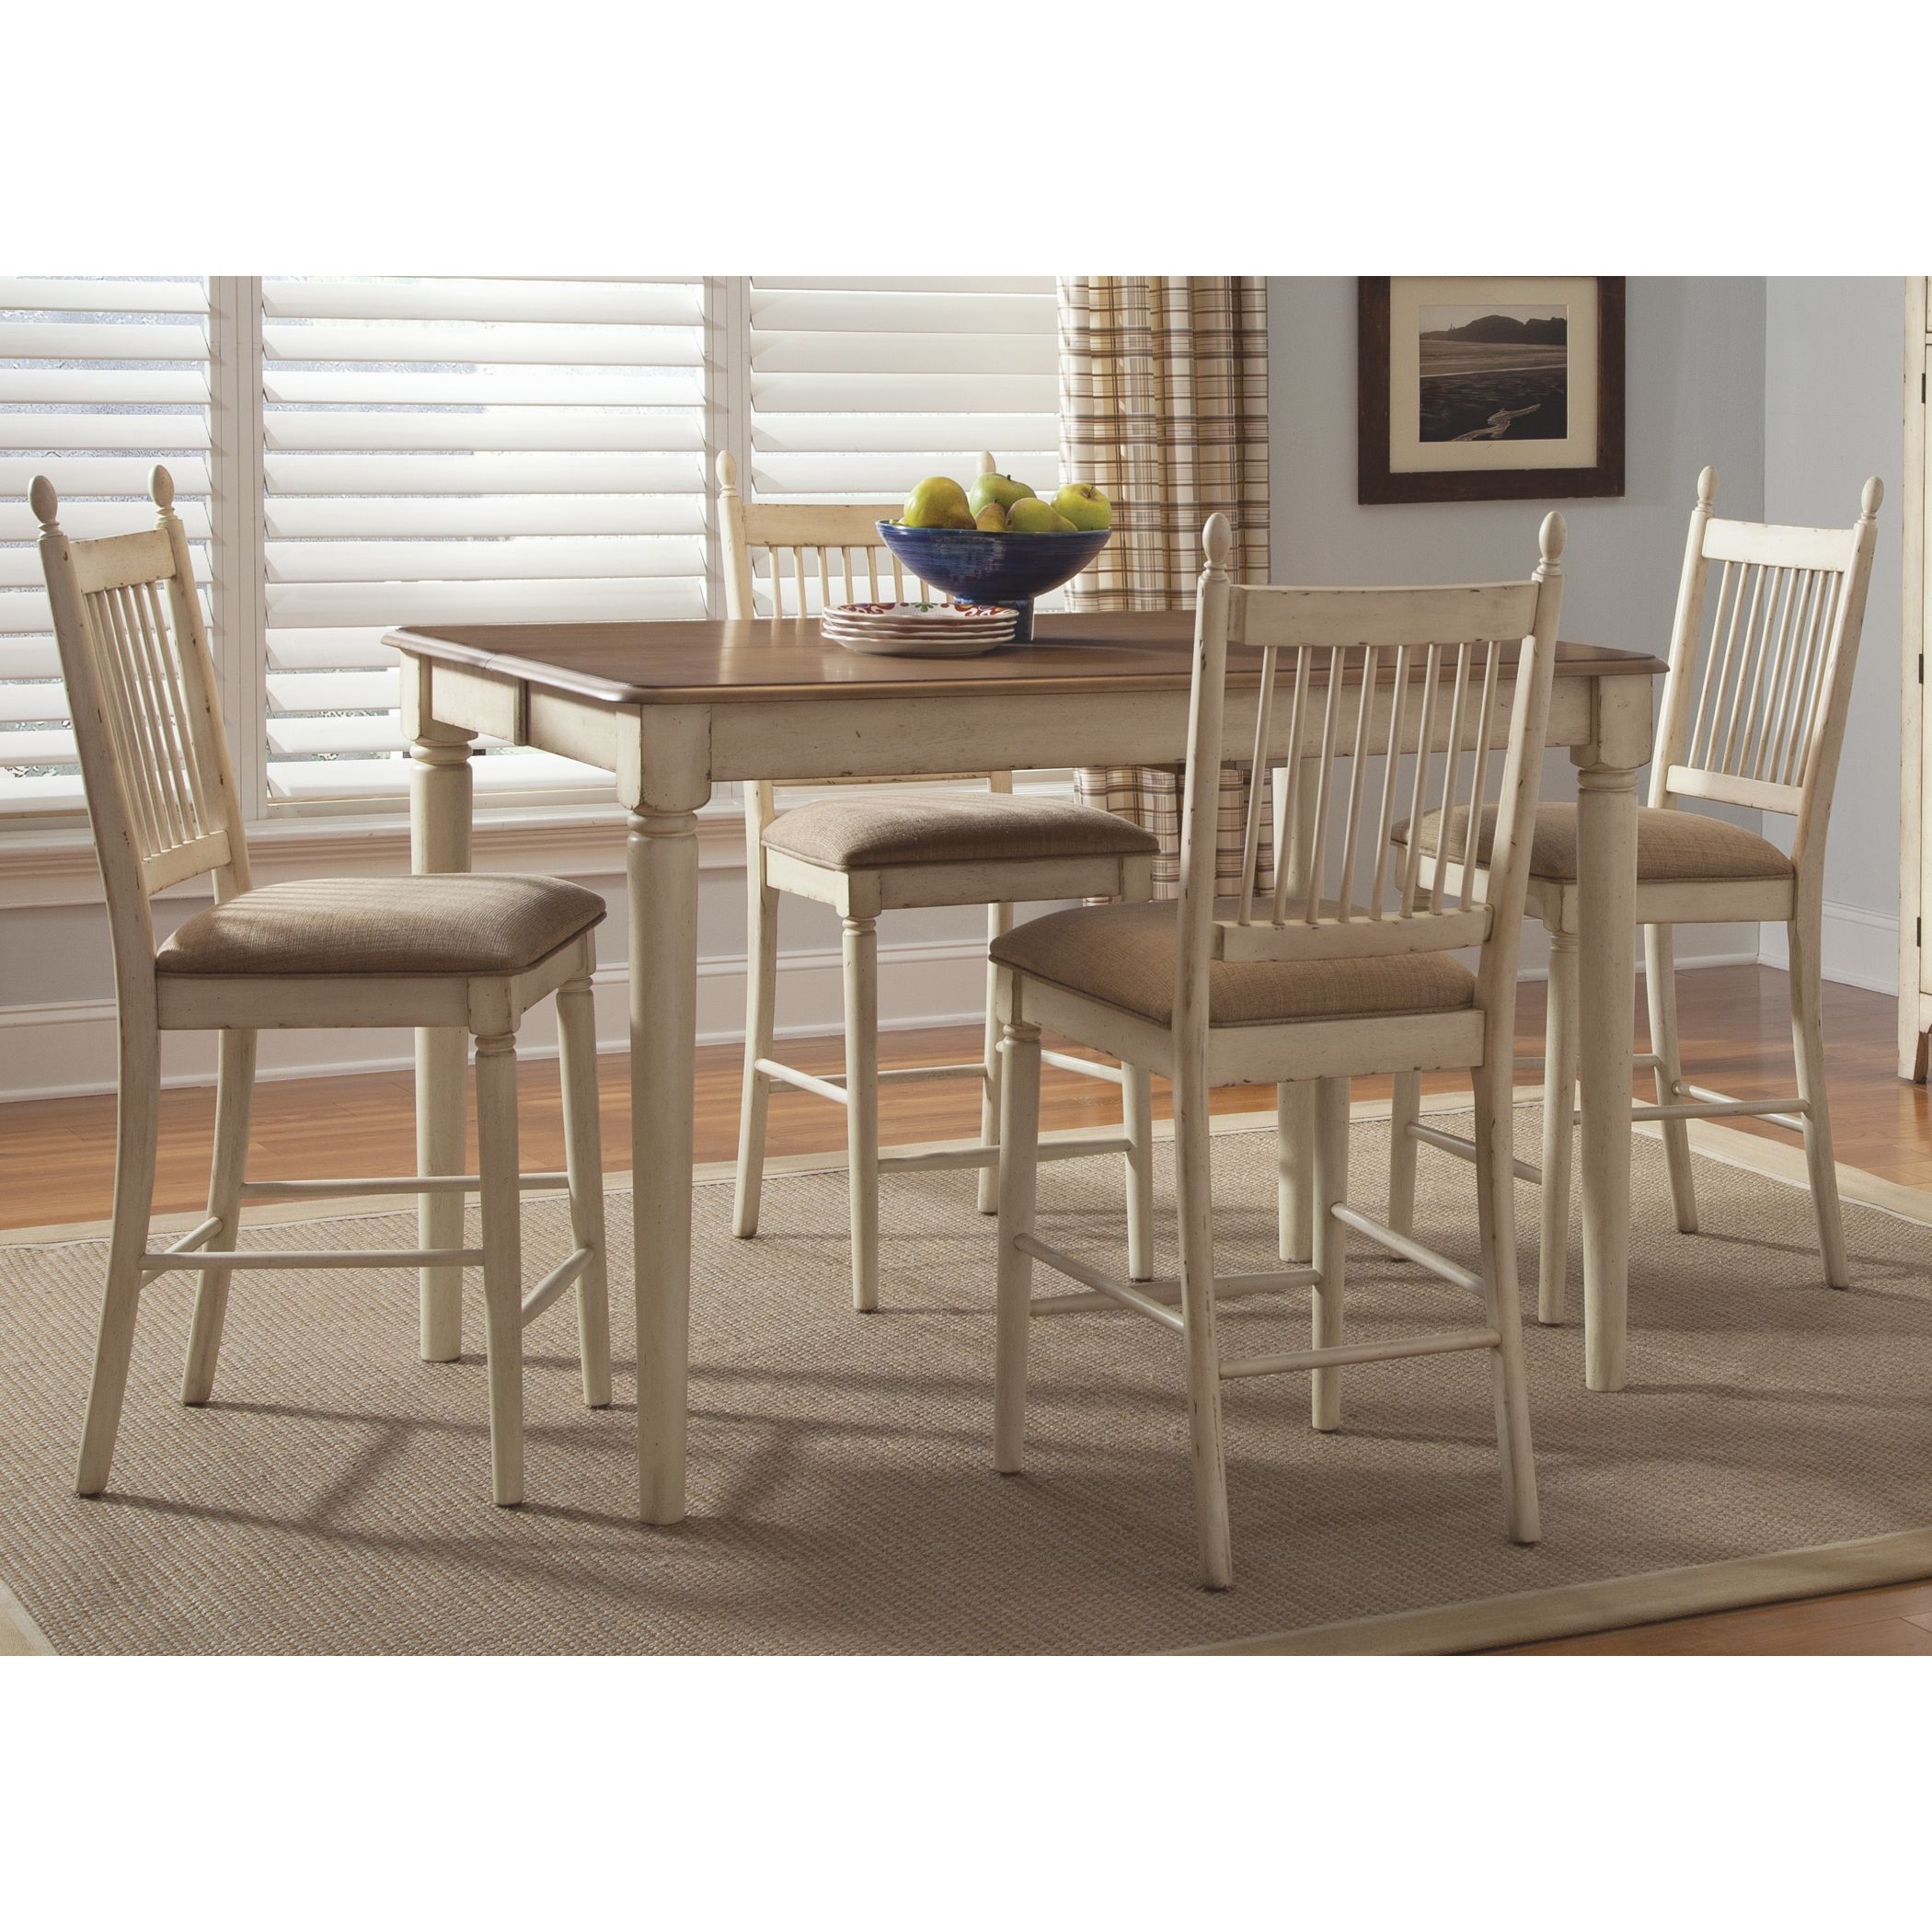 Light wood counter height dining sets 1